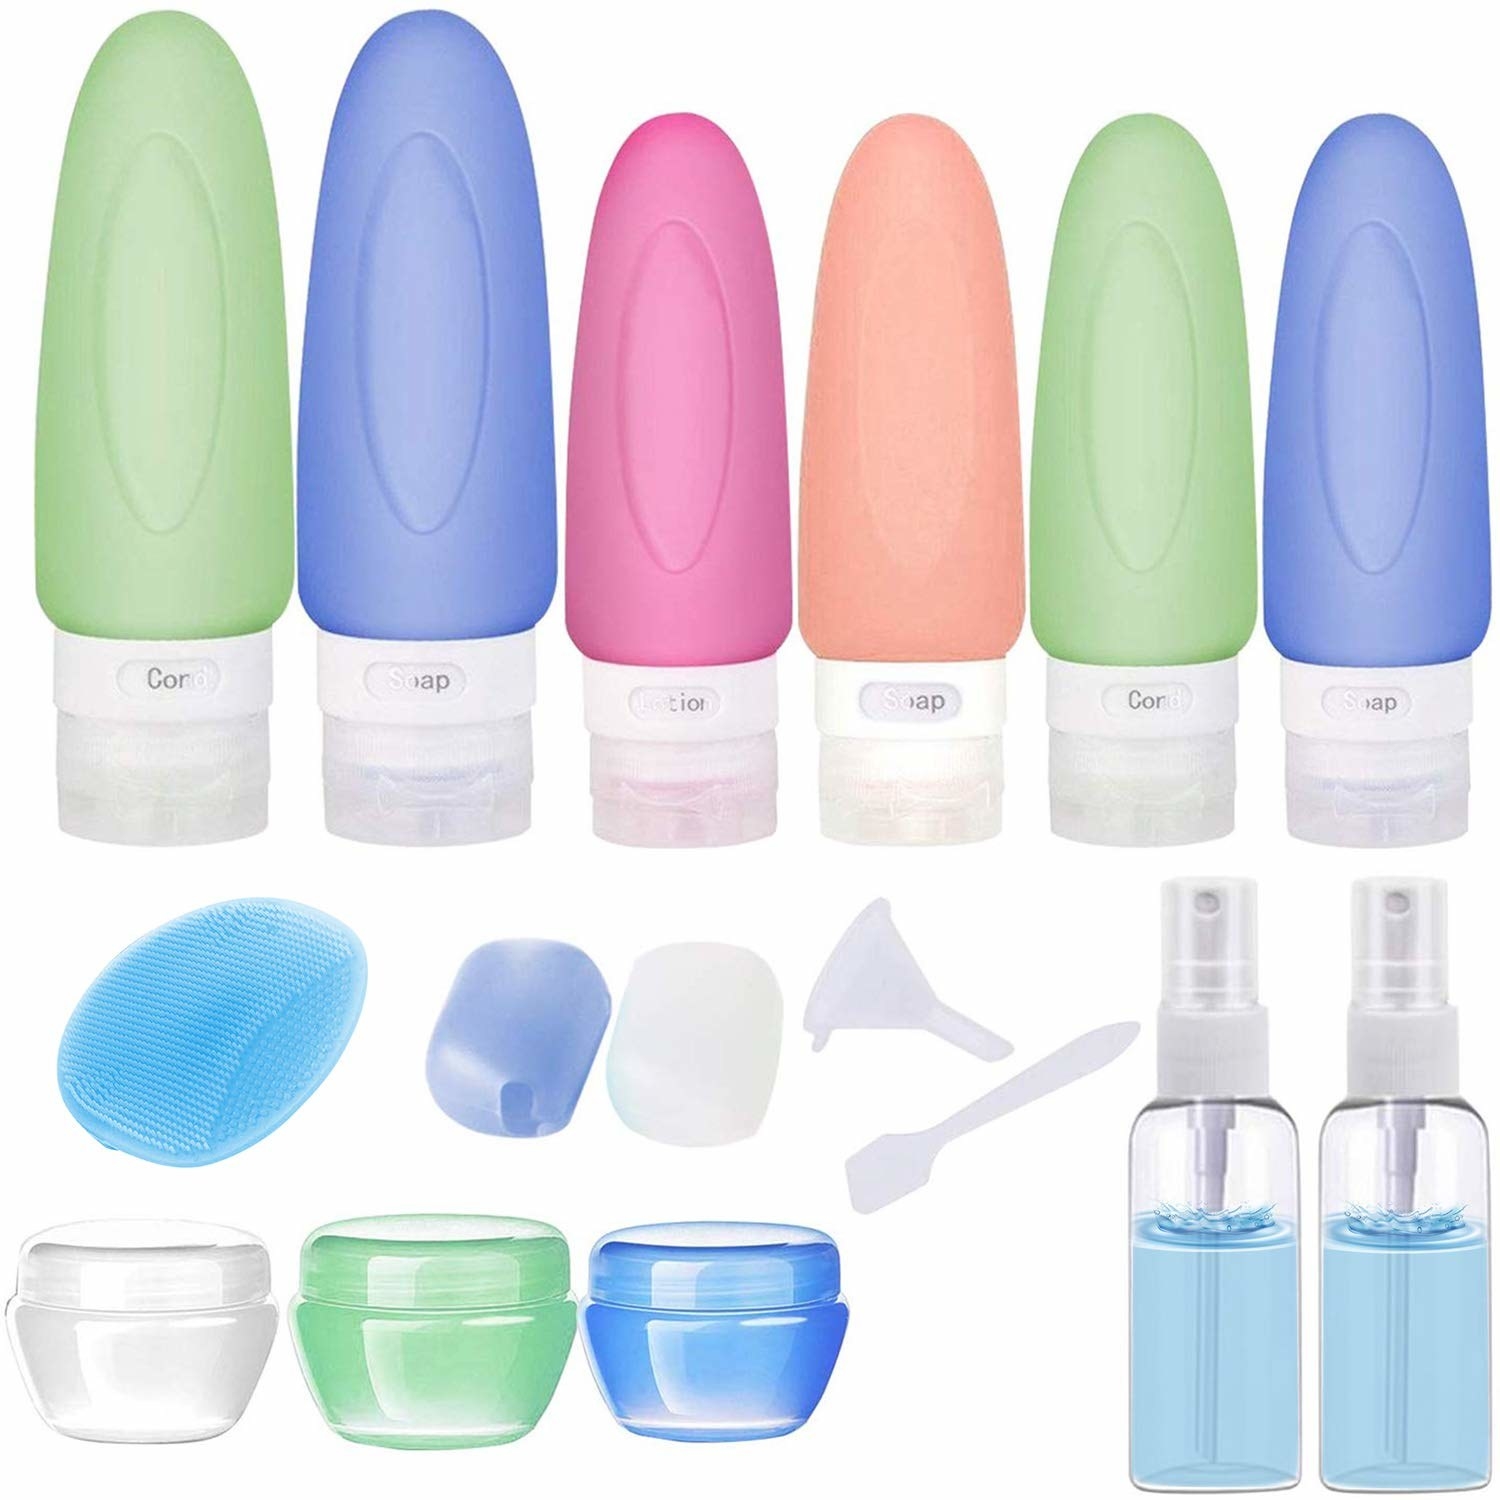 six silicone squirt bottles of different sizes, a silicone scrubber, two toothbrush covers, a funnel, a small spatular, three screw-top jars, and two spray bottles